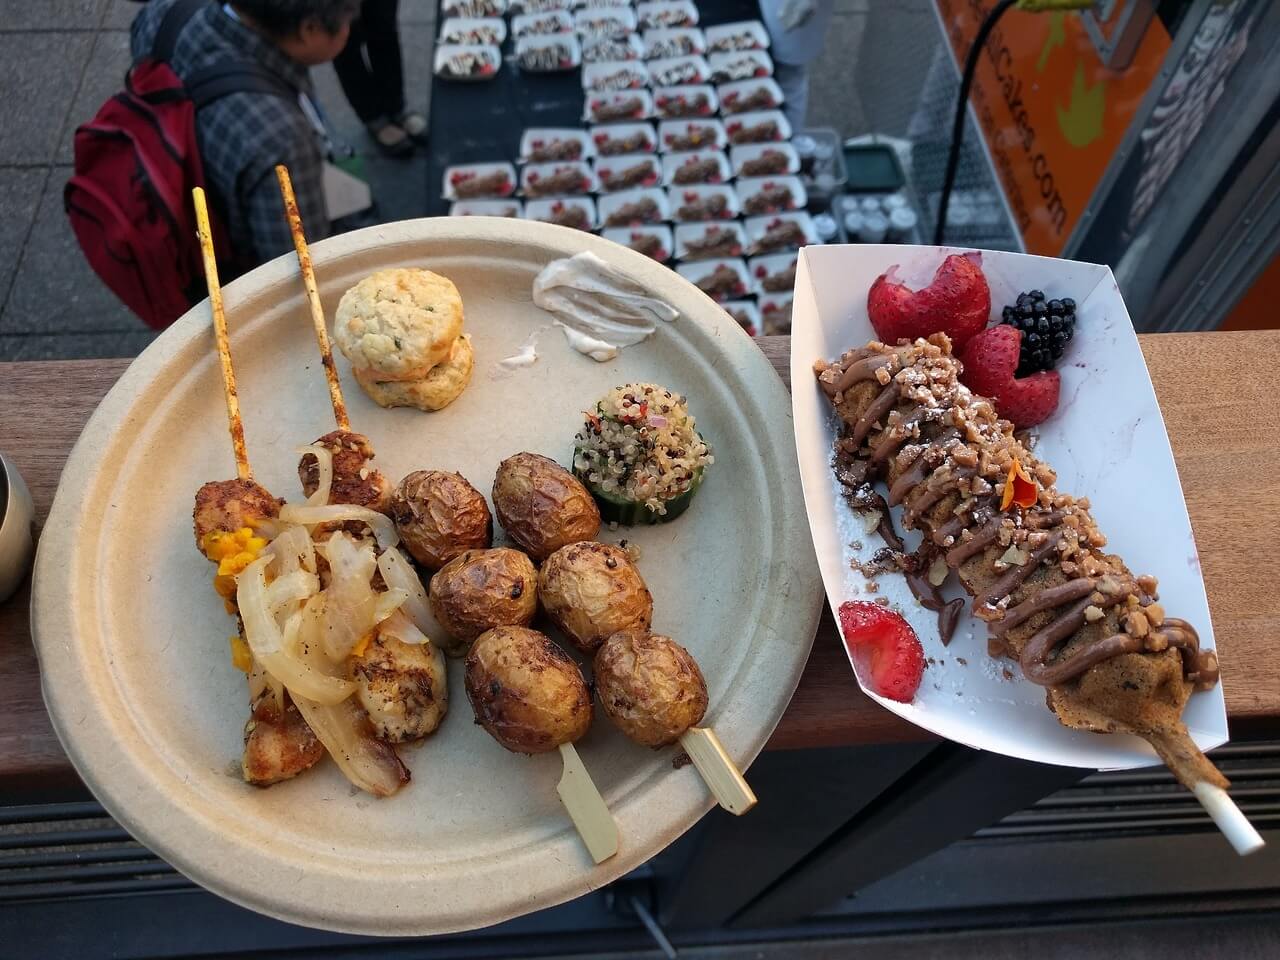 View of my dinner plate with chicken skewers, salt potato skewers, and other snacks, alongside a dessert treat on a stick.